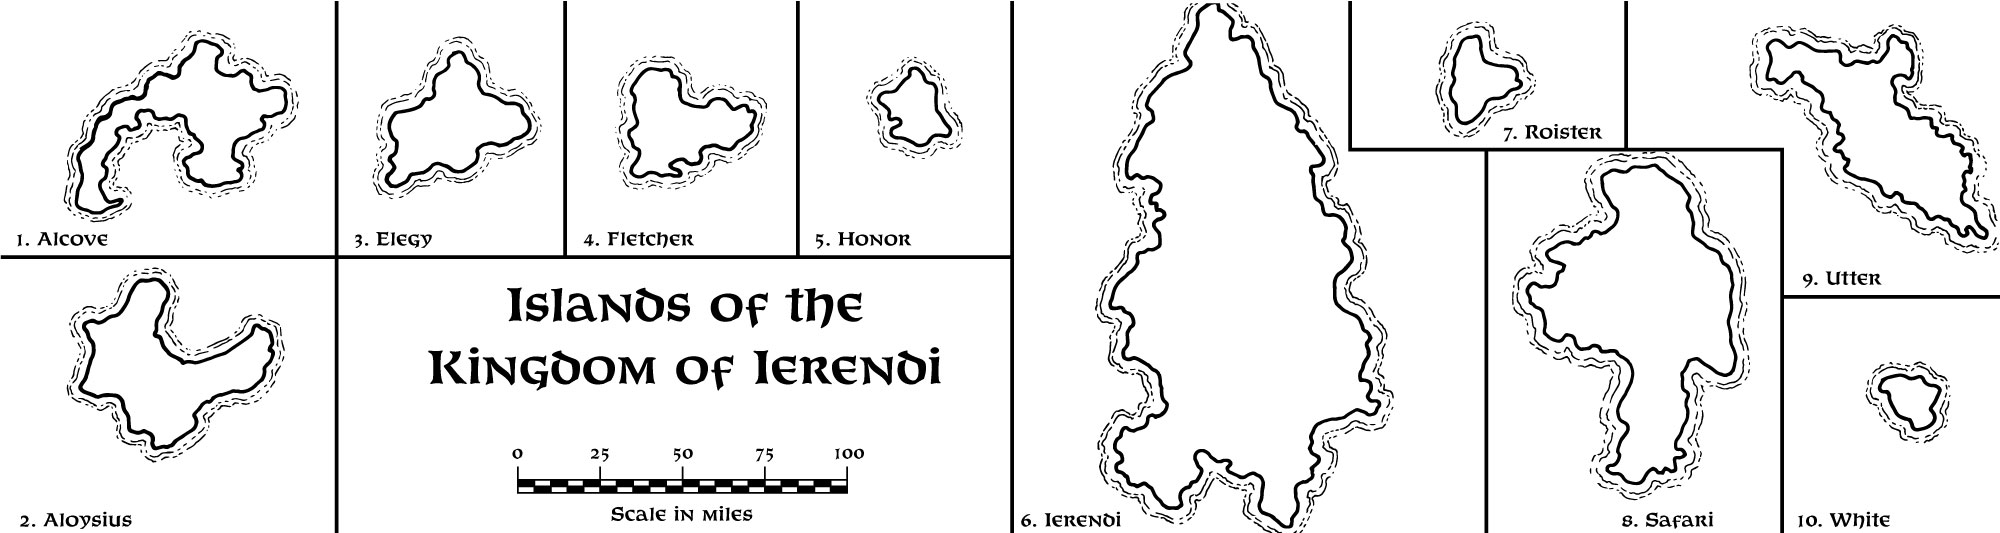 Replica of GAZ4 map of the Islands of the Kingdom of Ierendi